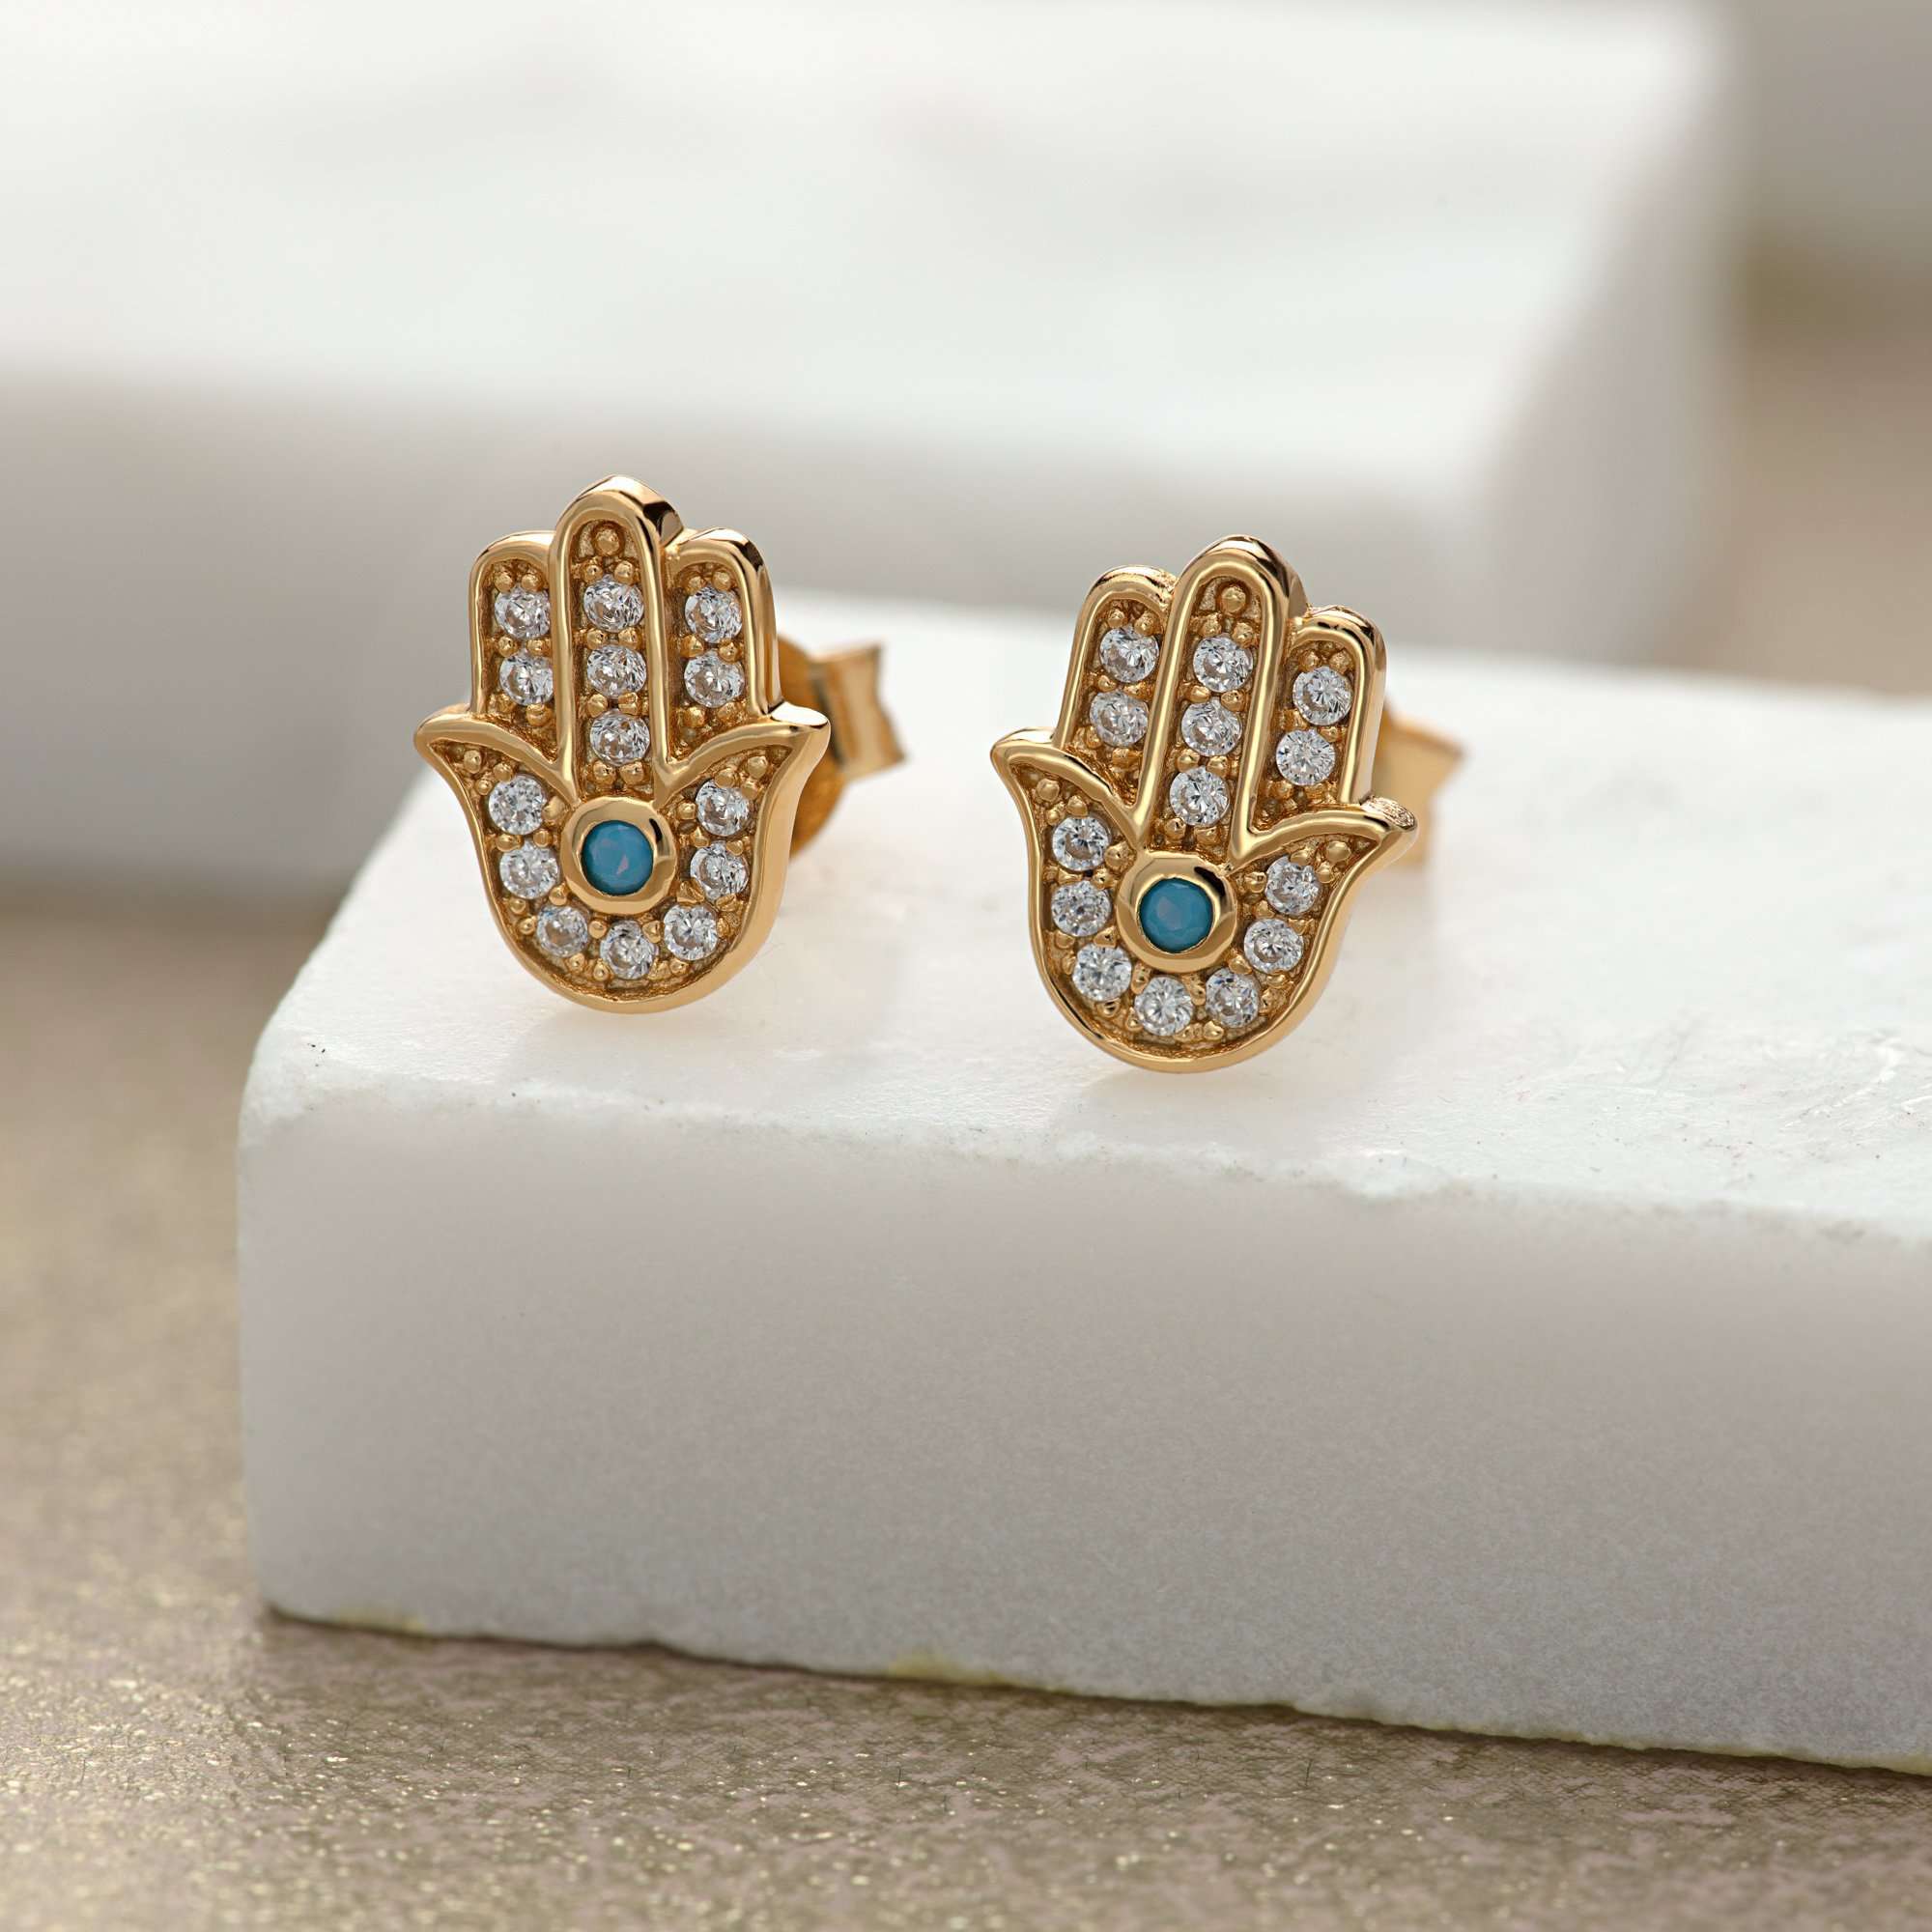  Gold Fatima Stud Earrings with Turquoise - by Scream Pretty